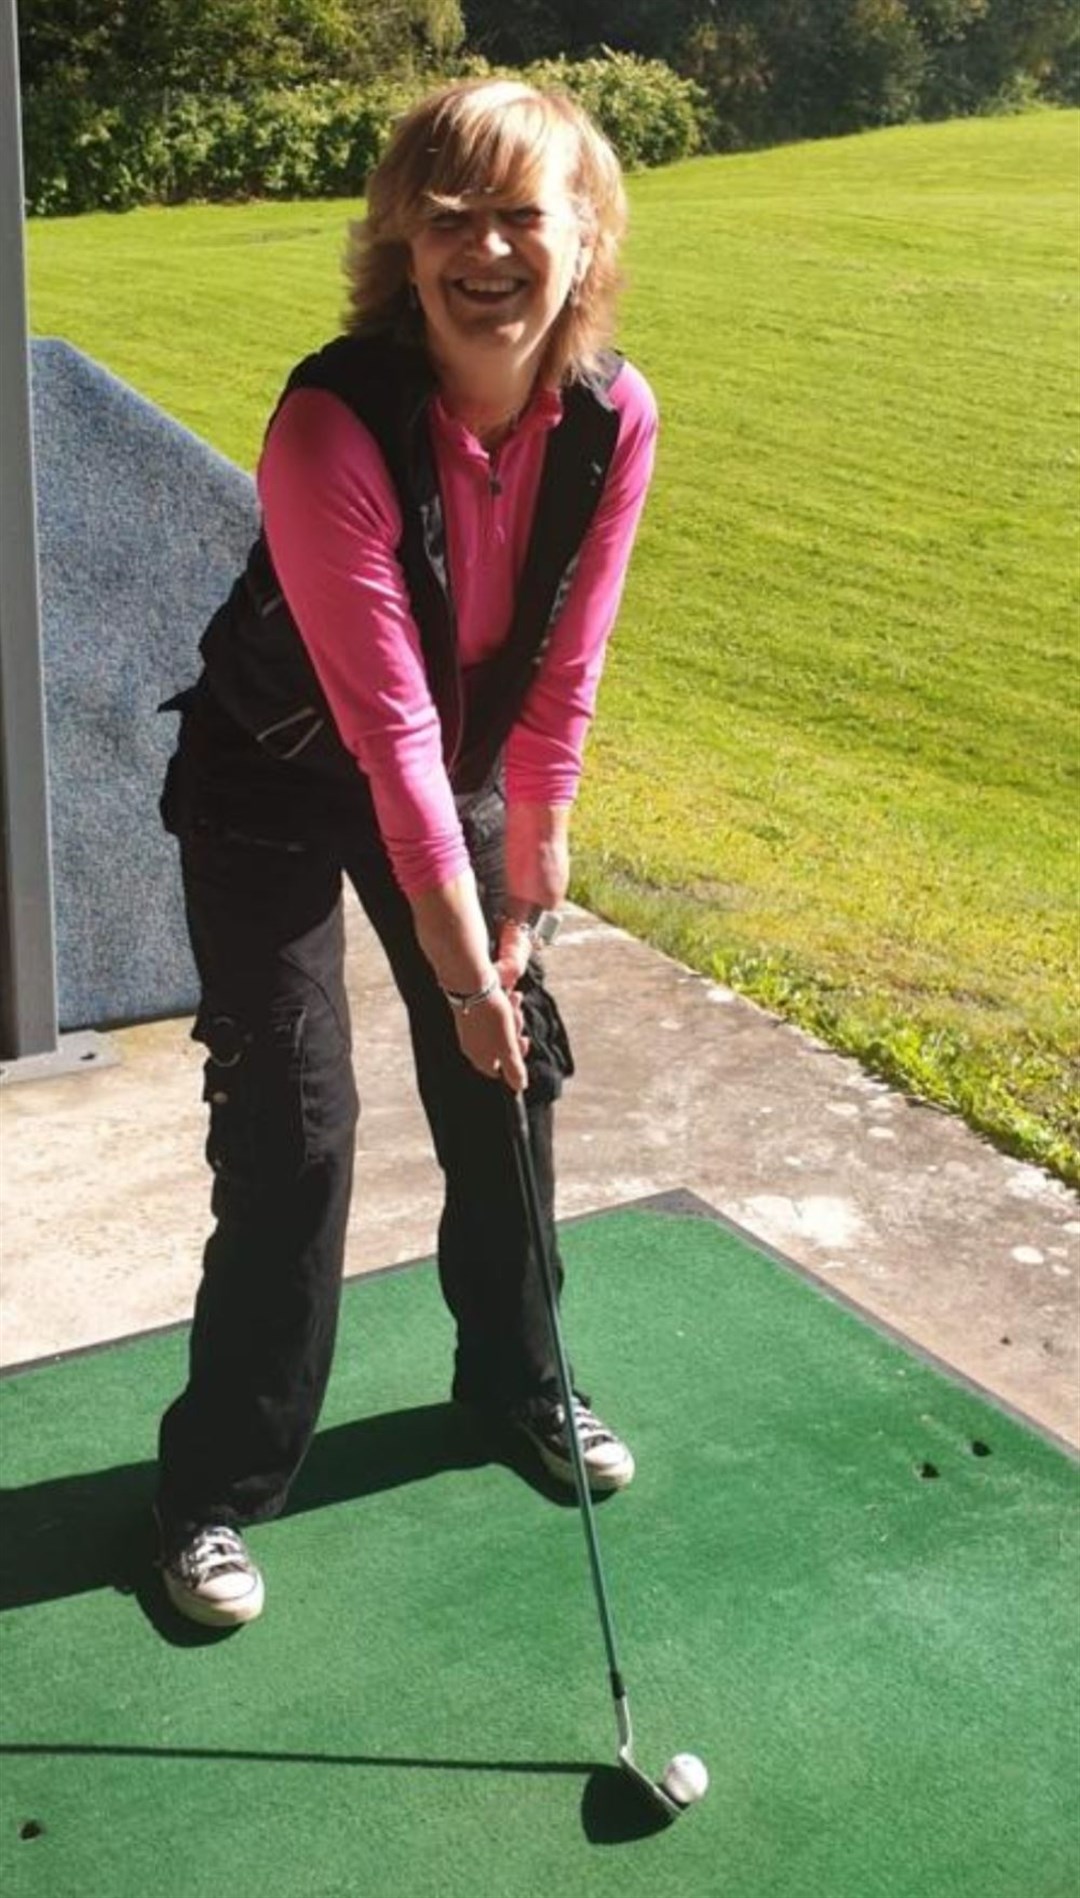 Golf is among the activities Ms Hutton has been getting to grips with (Finding Your Feet/PA)